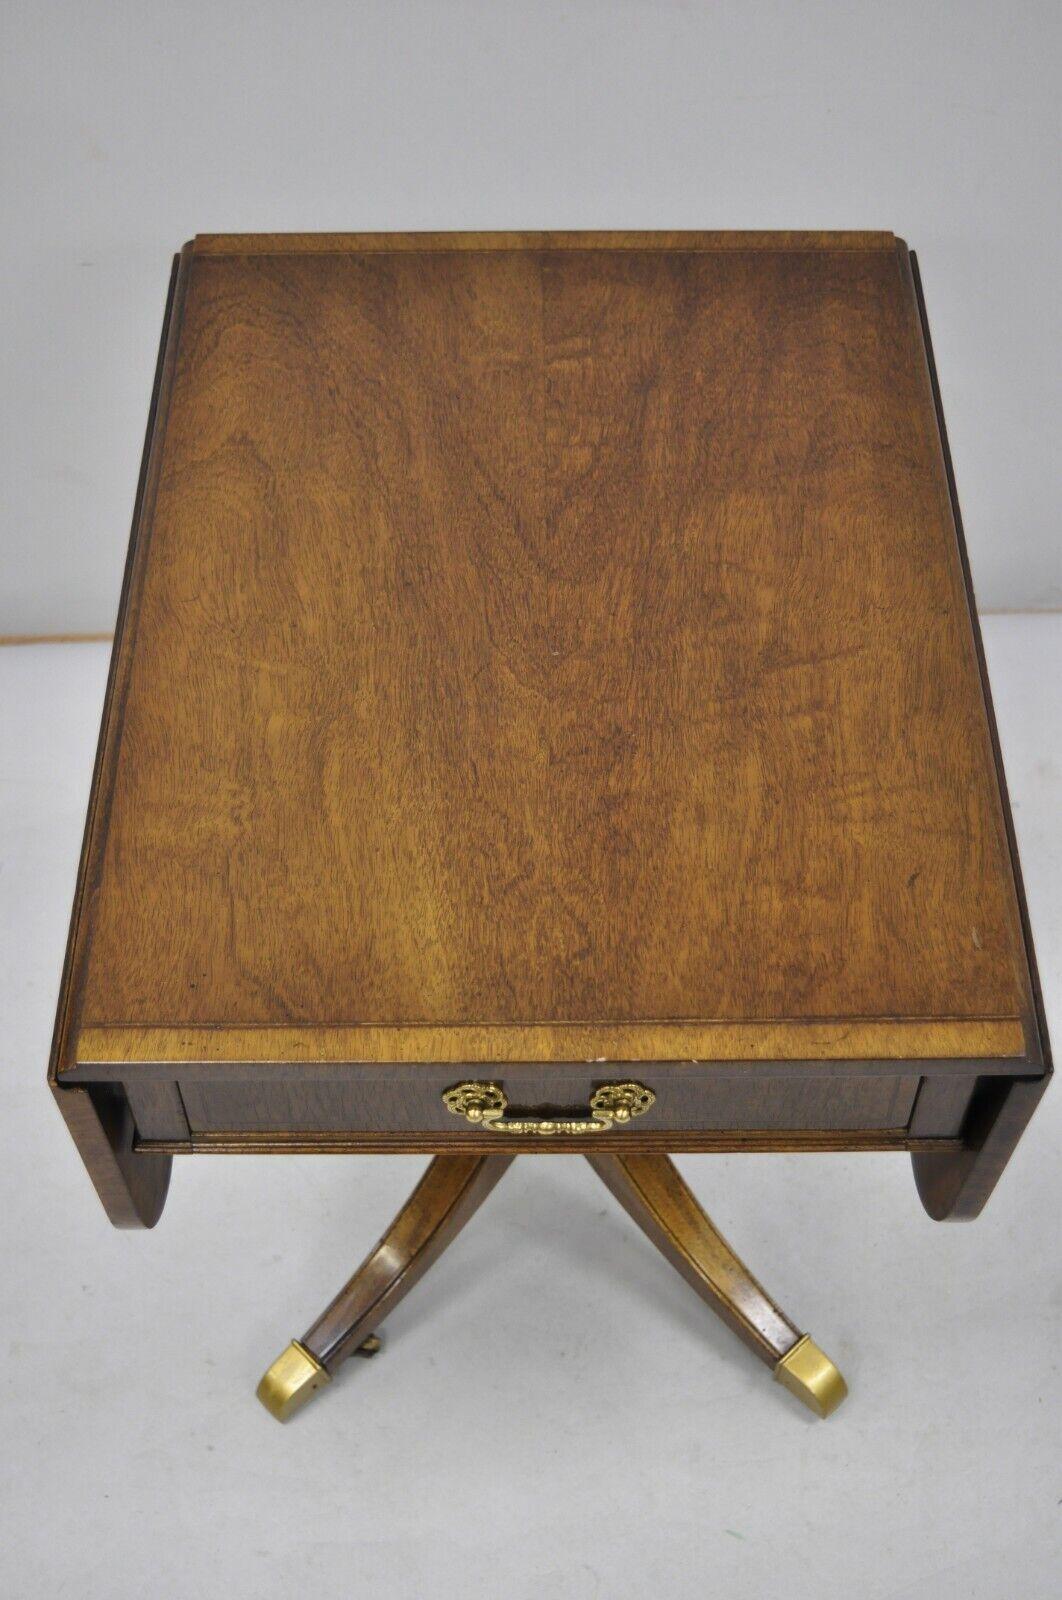 Vintage mahogany banded and inlaid drop leaf pembroke lamp side table. Item features banded and inlaid top, brass rolling casters, drop leaf sides, beautiful wood grain, 1 dovetailed drawer, solid brass hardware. Circa mid to late 20th century.